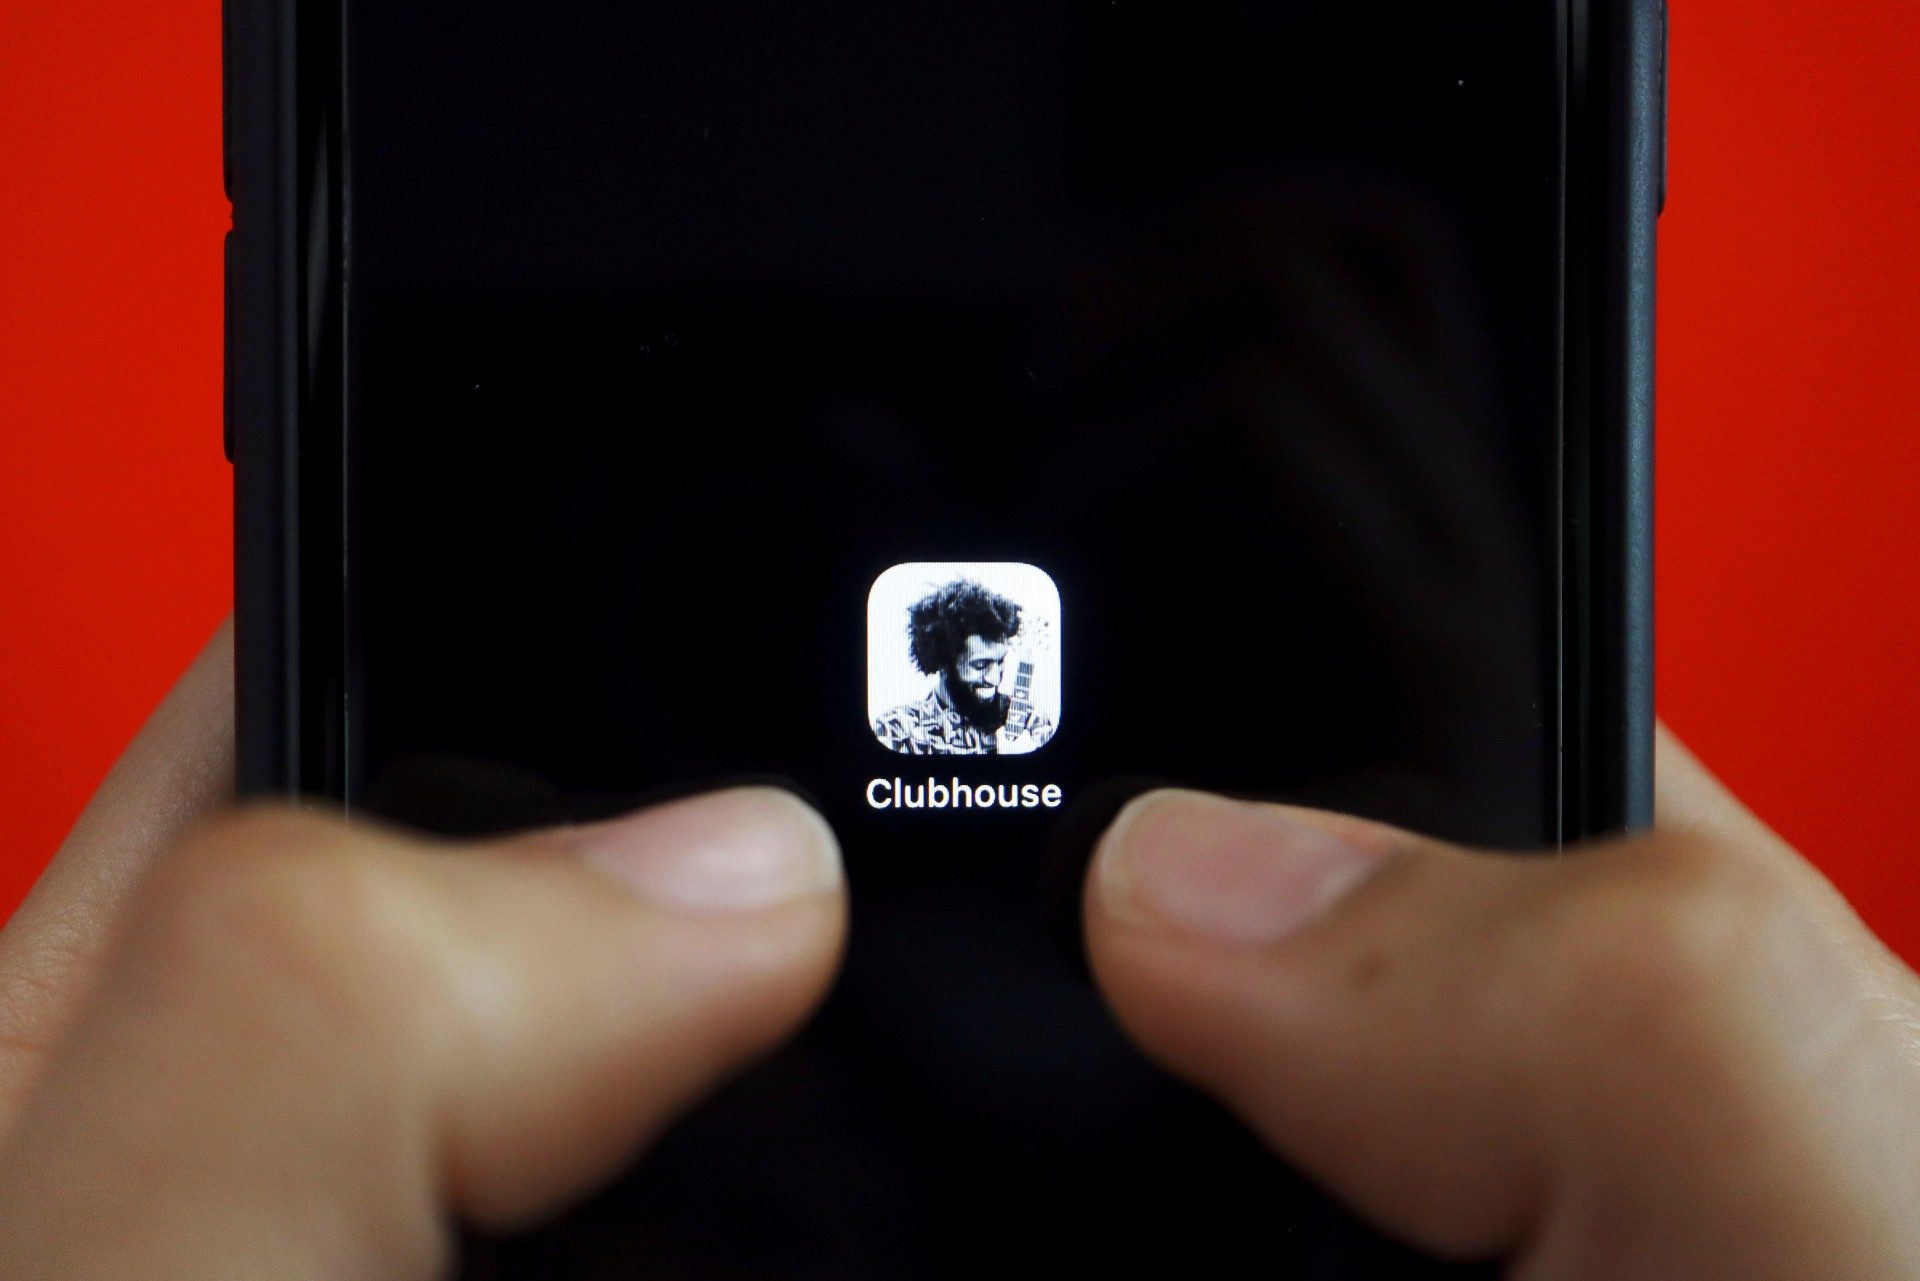 Audio app Clubhouse floats payments feature for creators